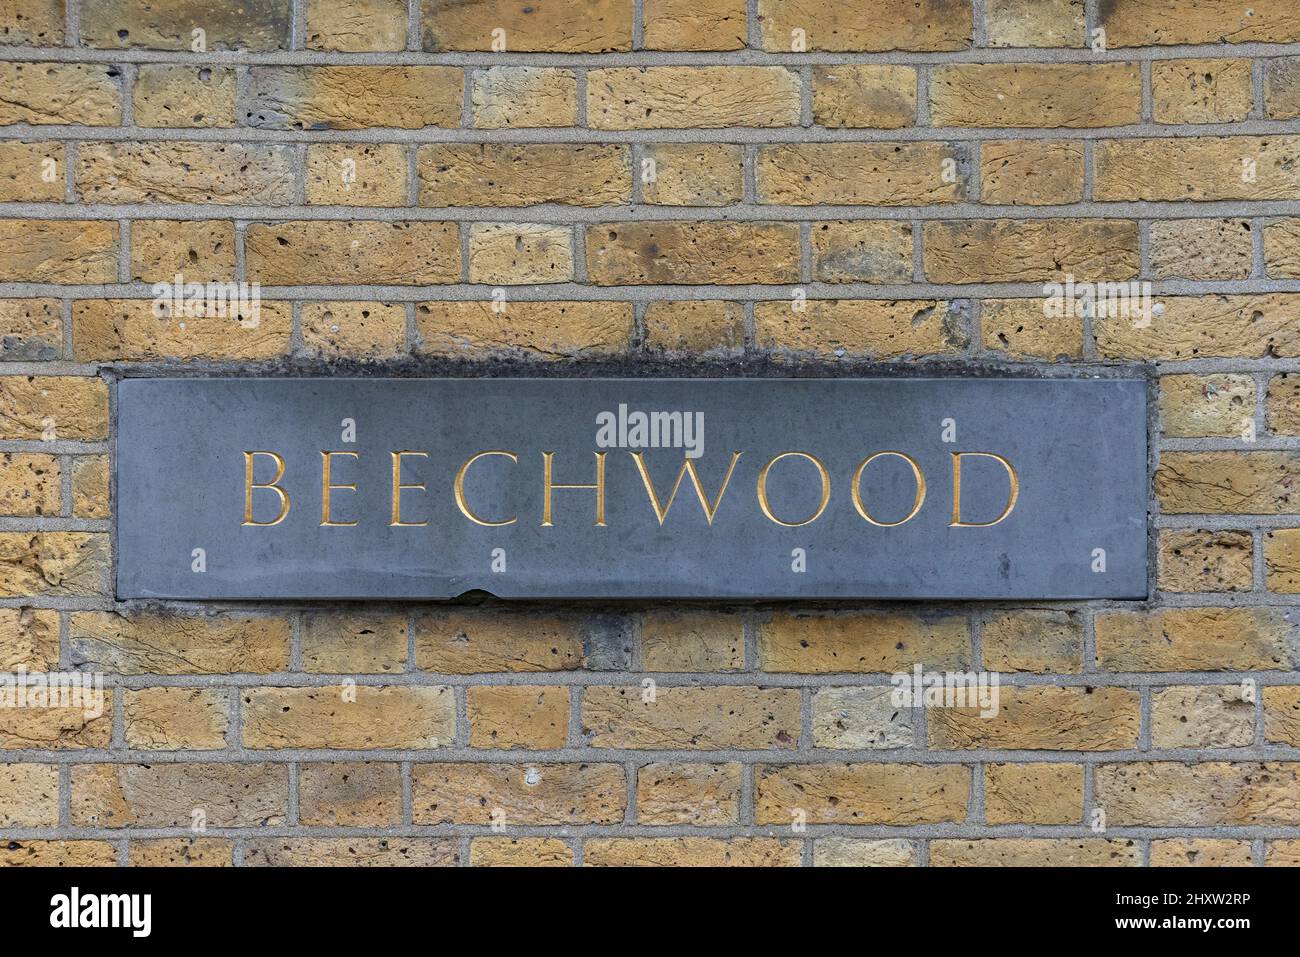 Home of Russian Oligarch Alisher Usmanov, who owns the £48 million Beechwood House in Hampstead Lane Highgate Hill, North London, England, UK Stock Photo